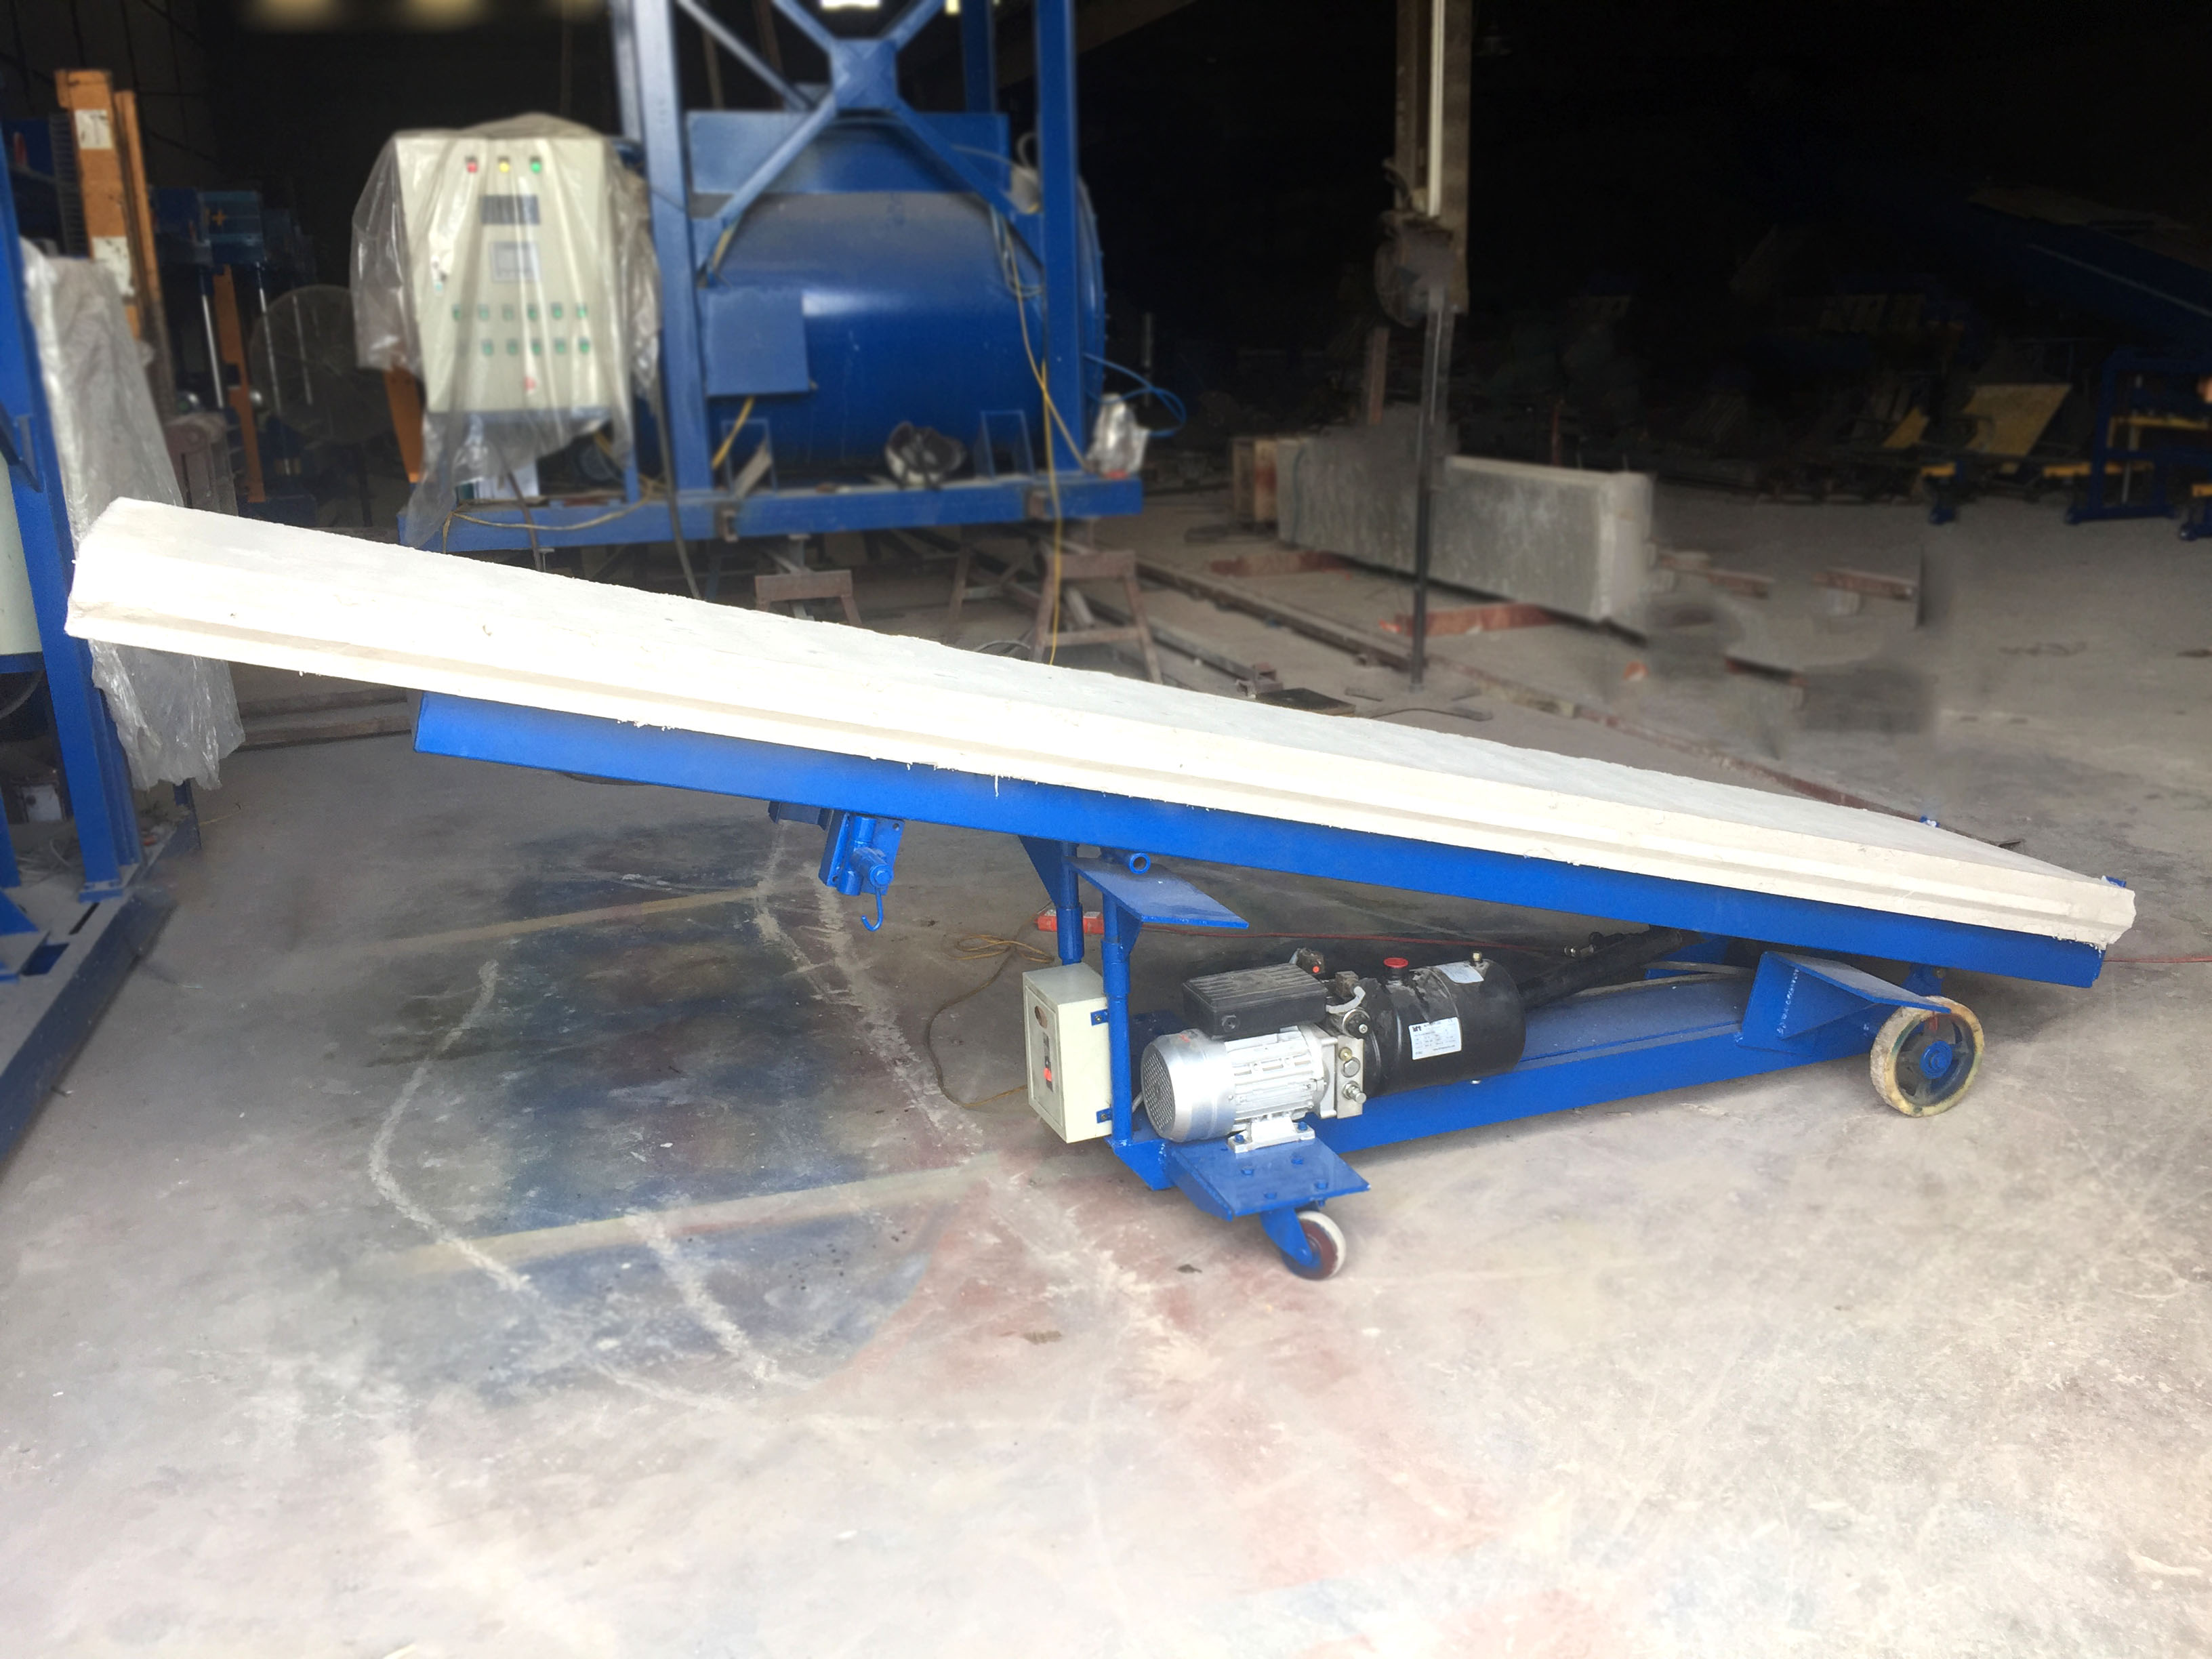 Our concrete lifting machine makes it easy to lift and match panels in the construction process